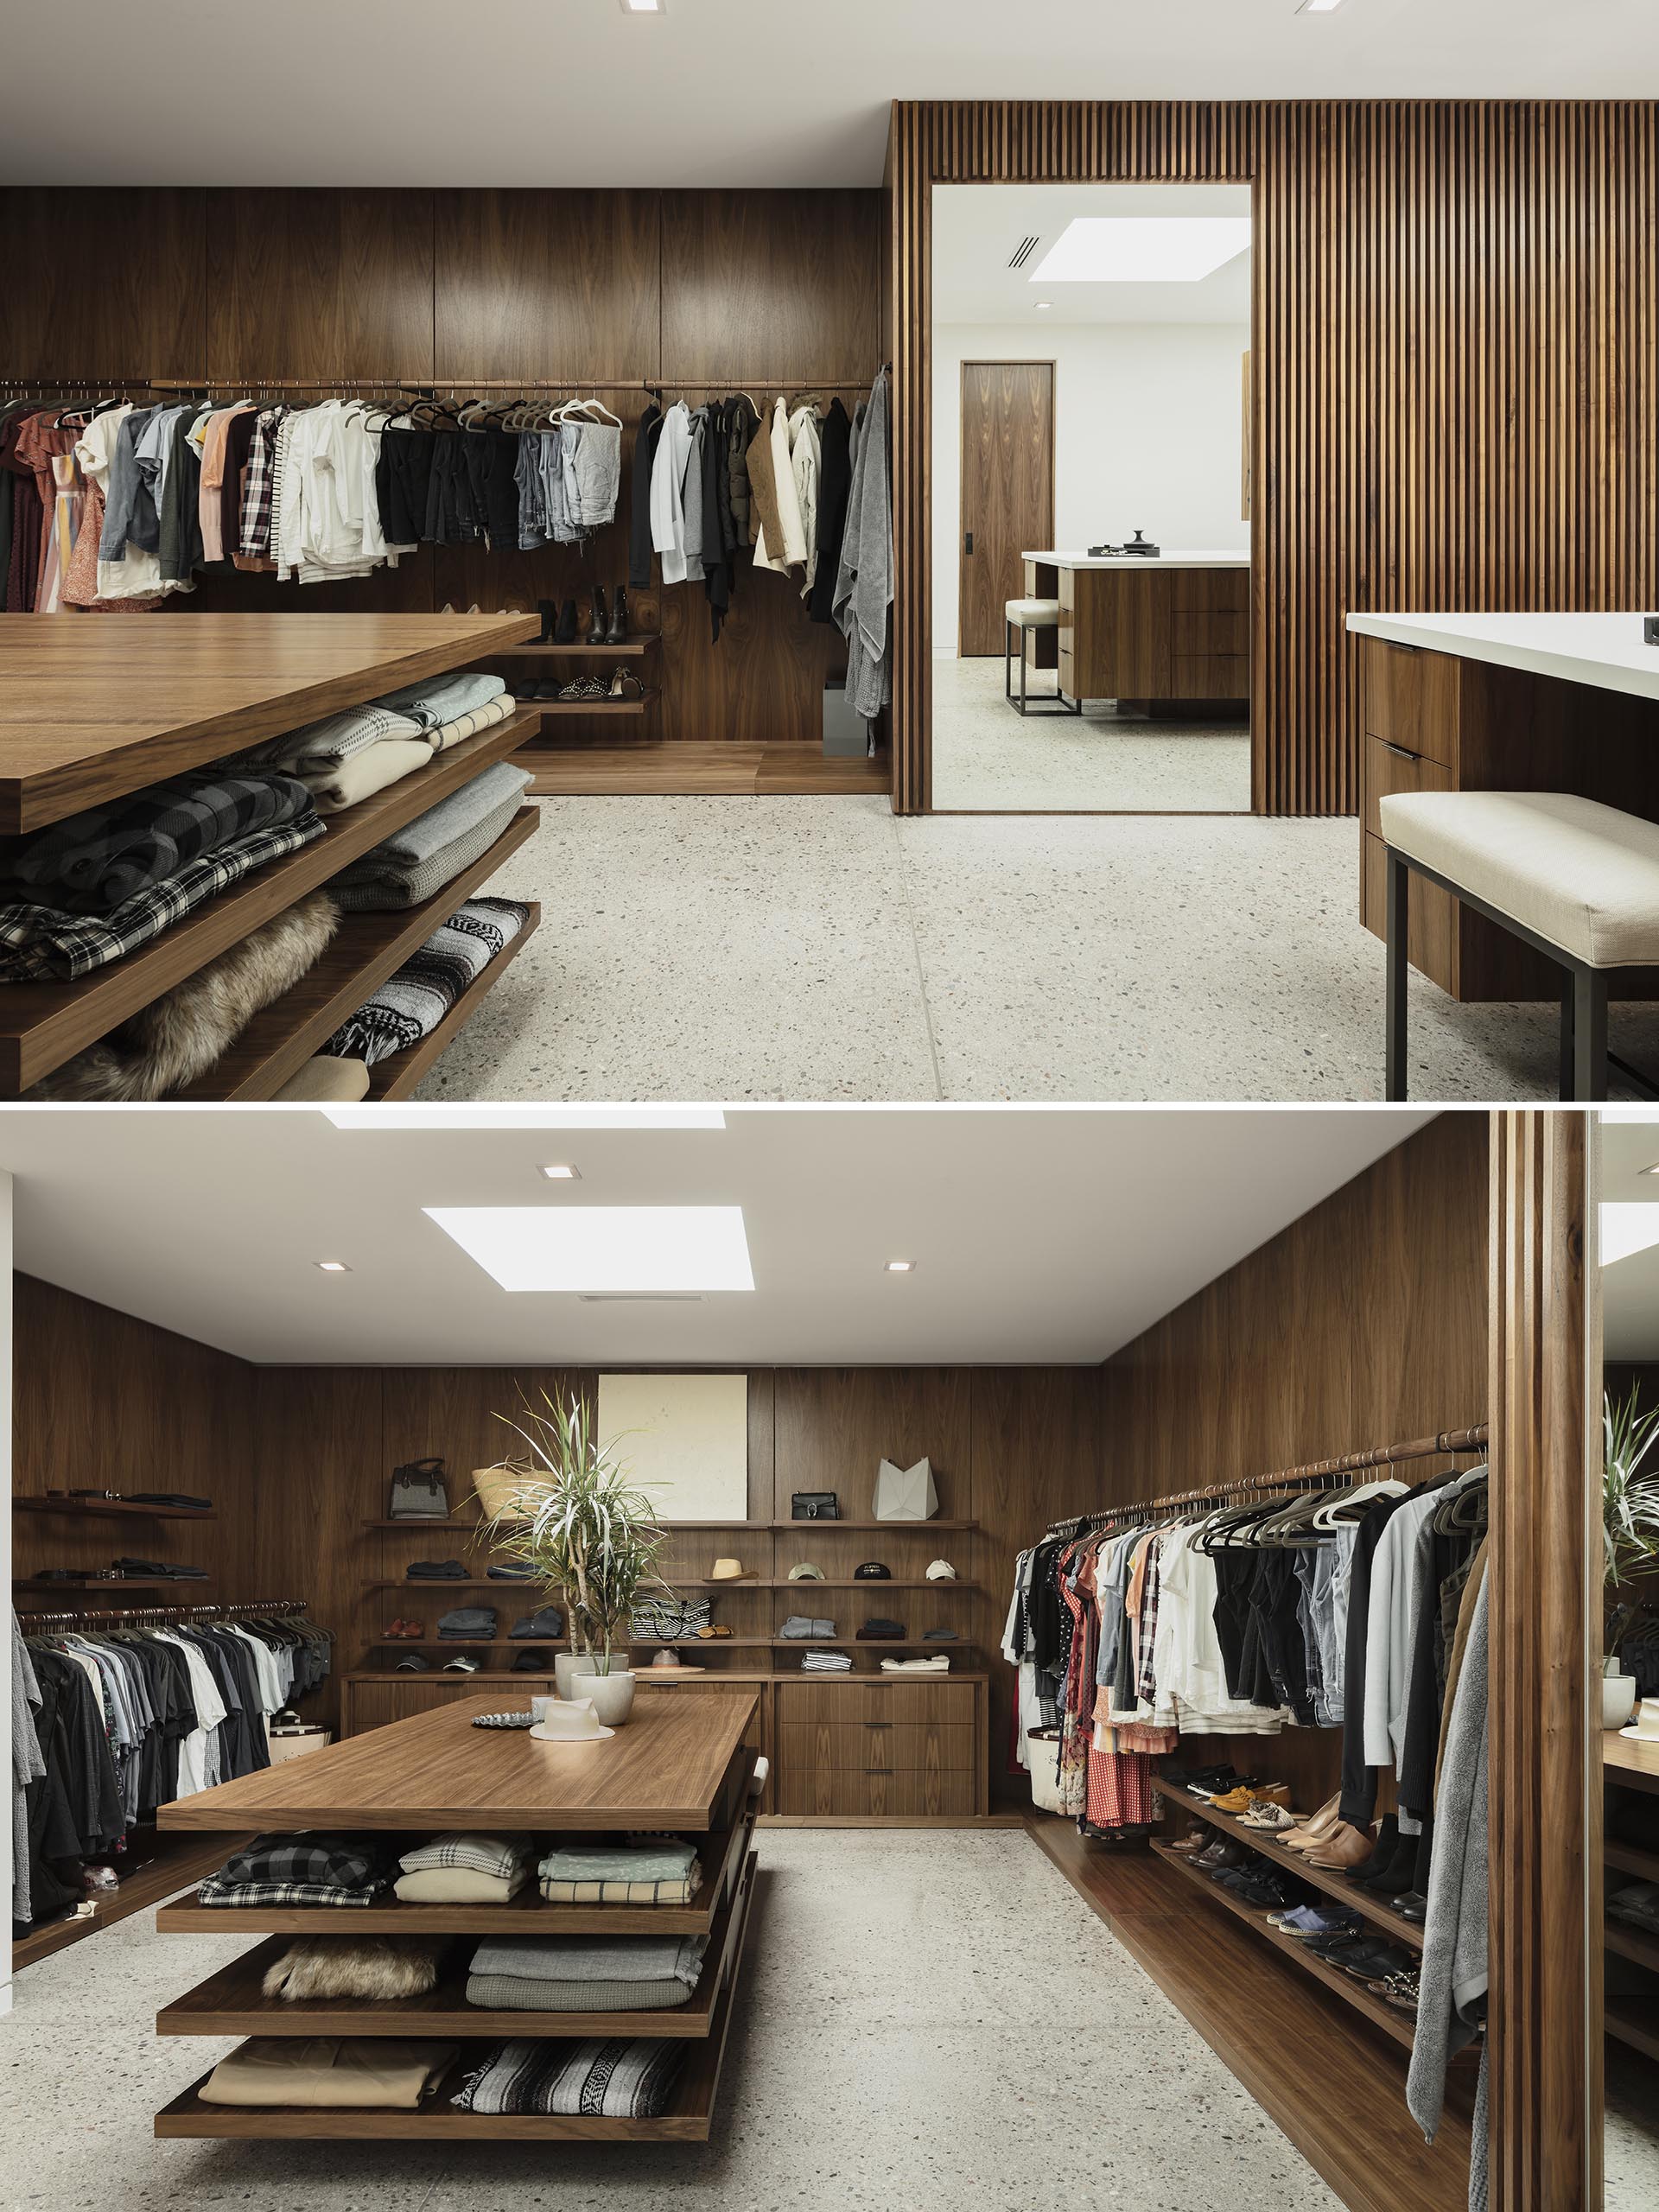 A retail inspired walk-in closet with a central table providing extra storage.